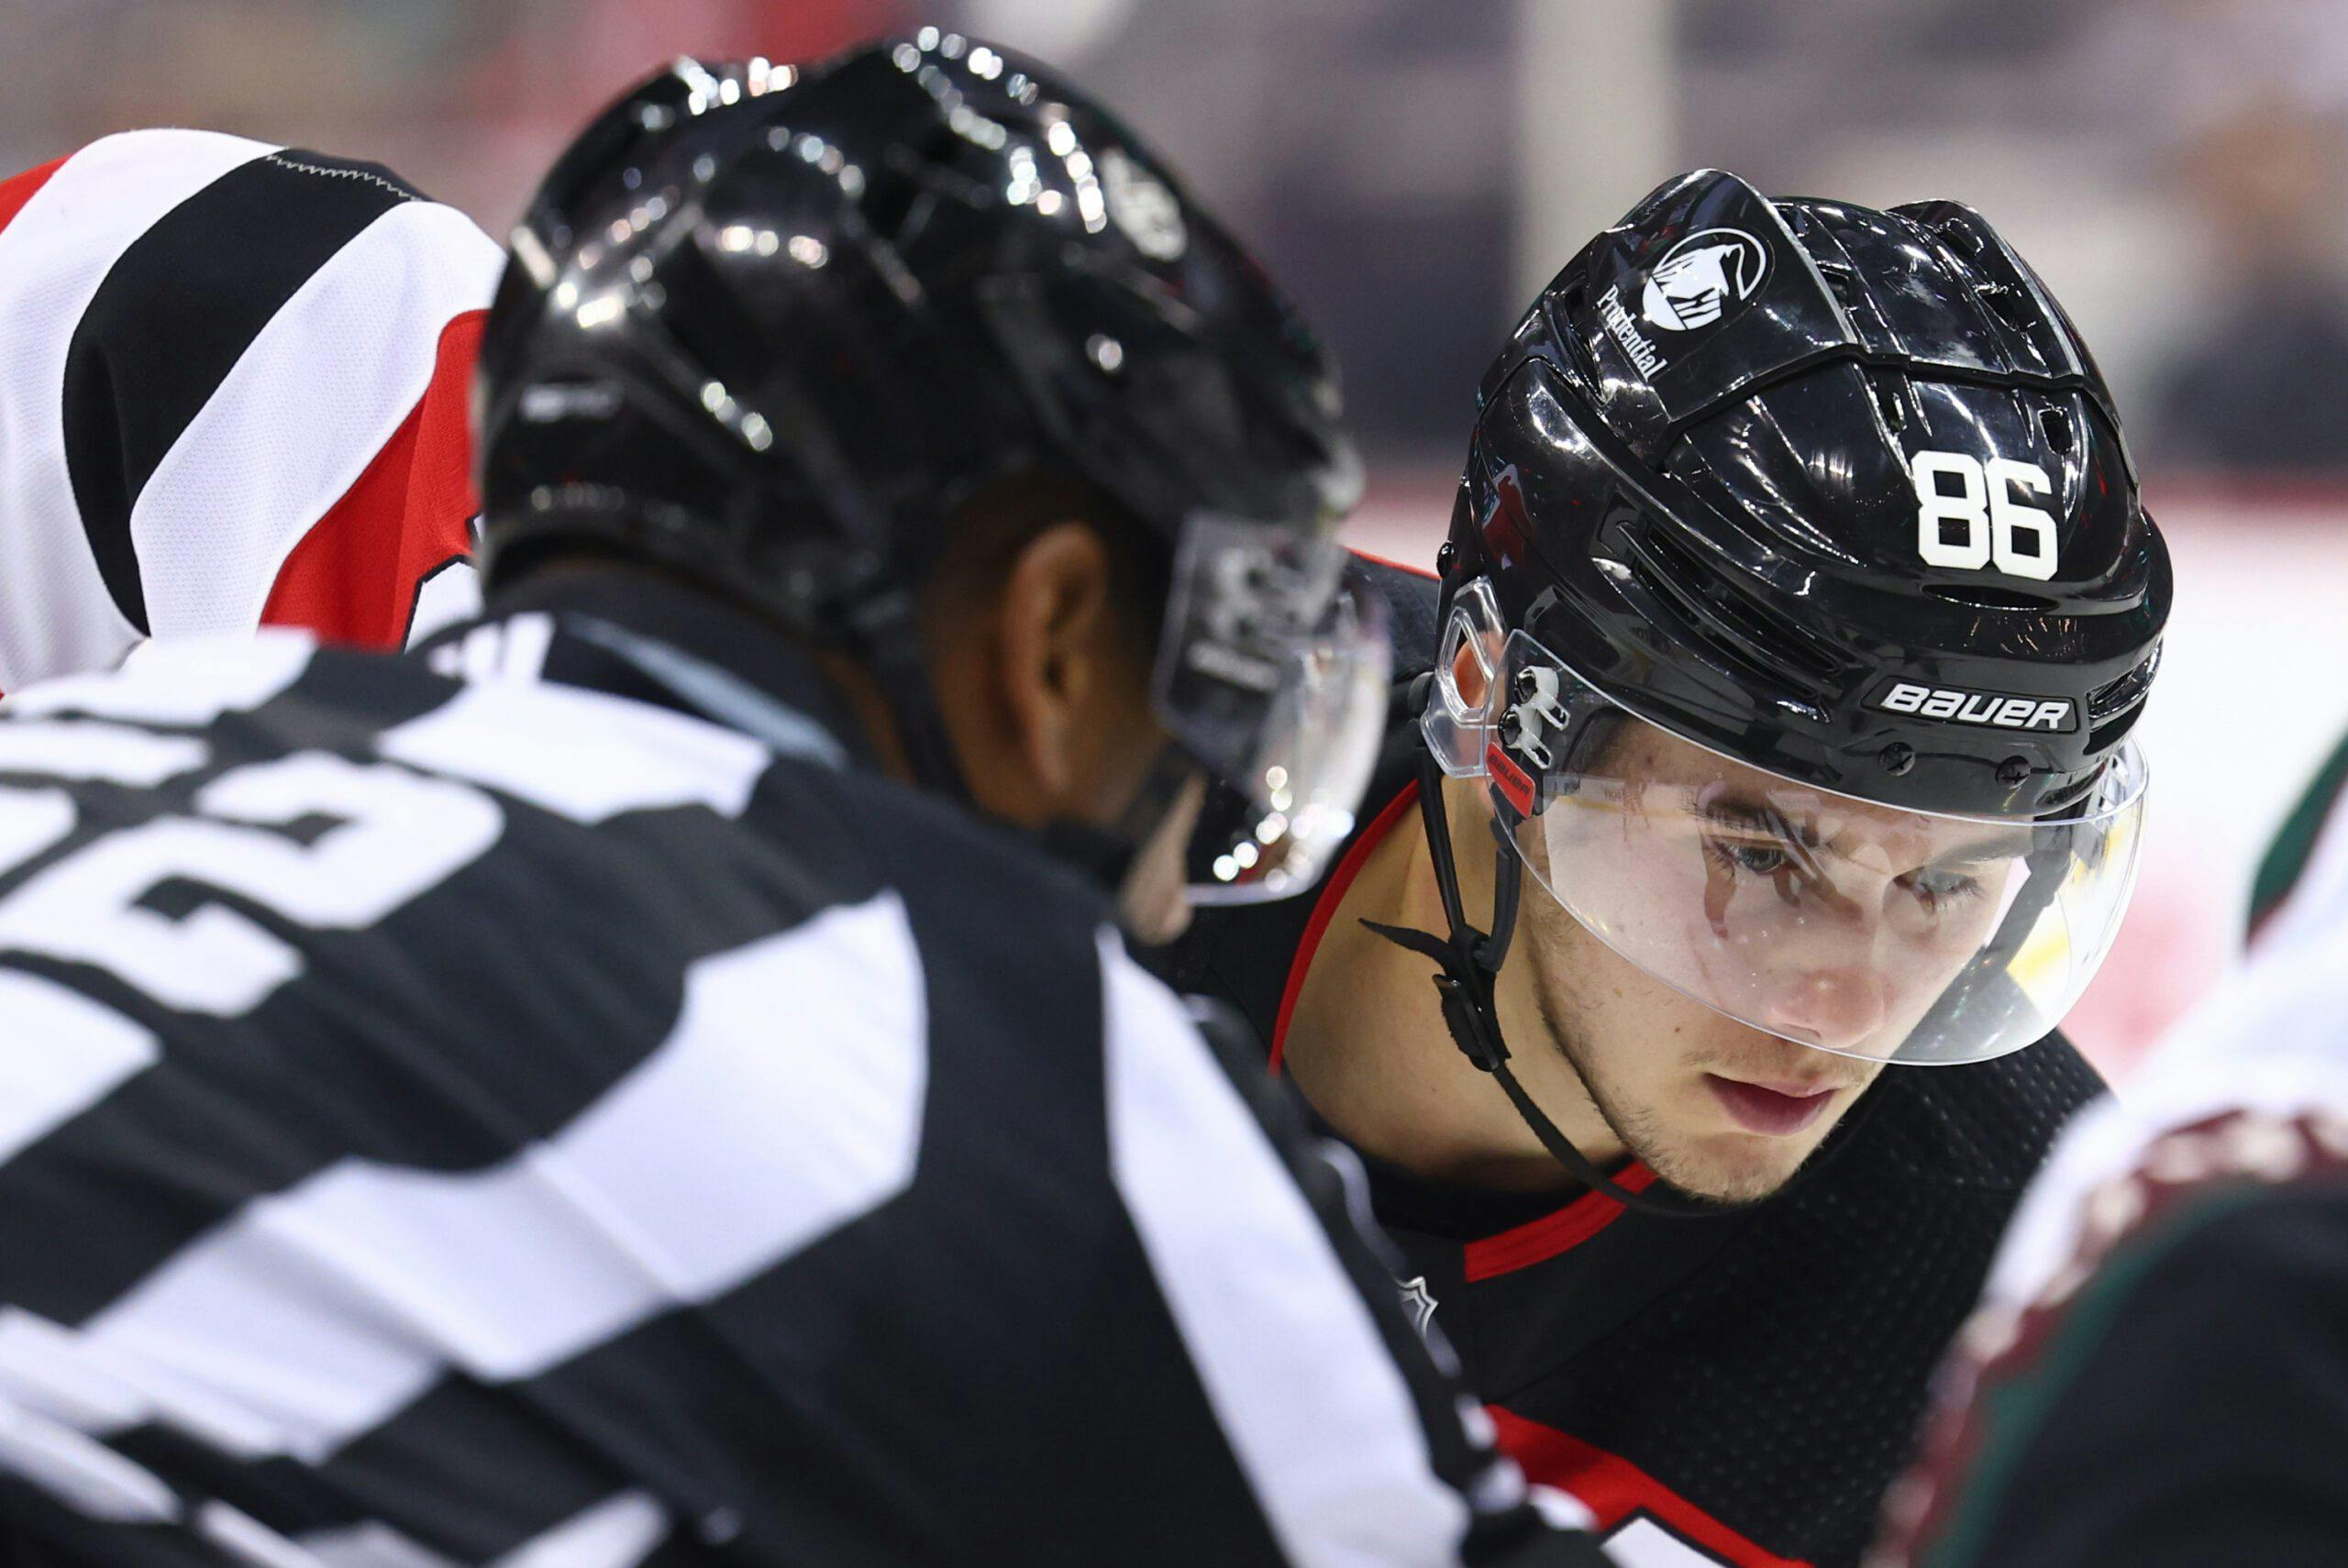 New Jersey Devils’ Jack Hughes activated off IR, set to return vs. Flames